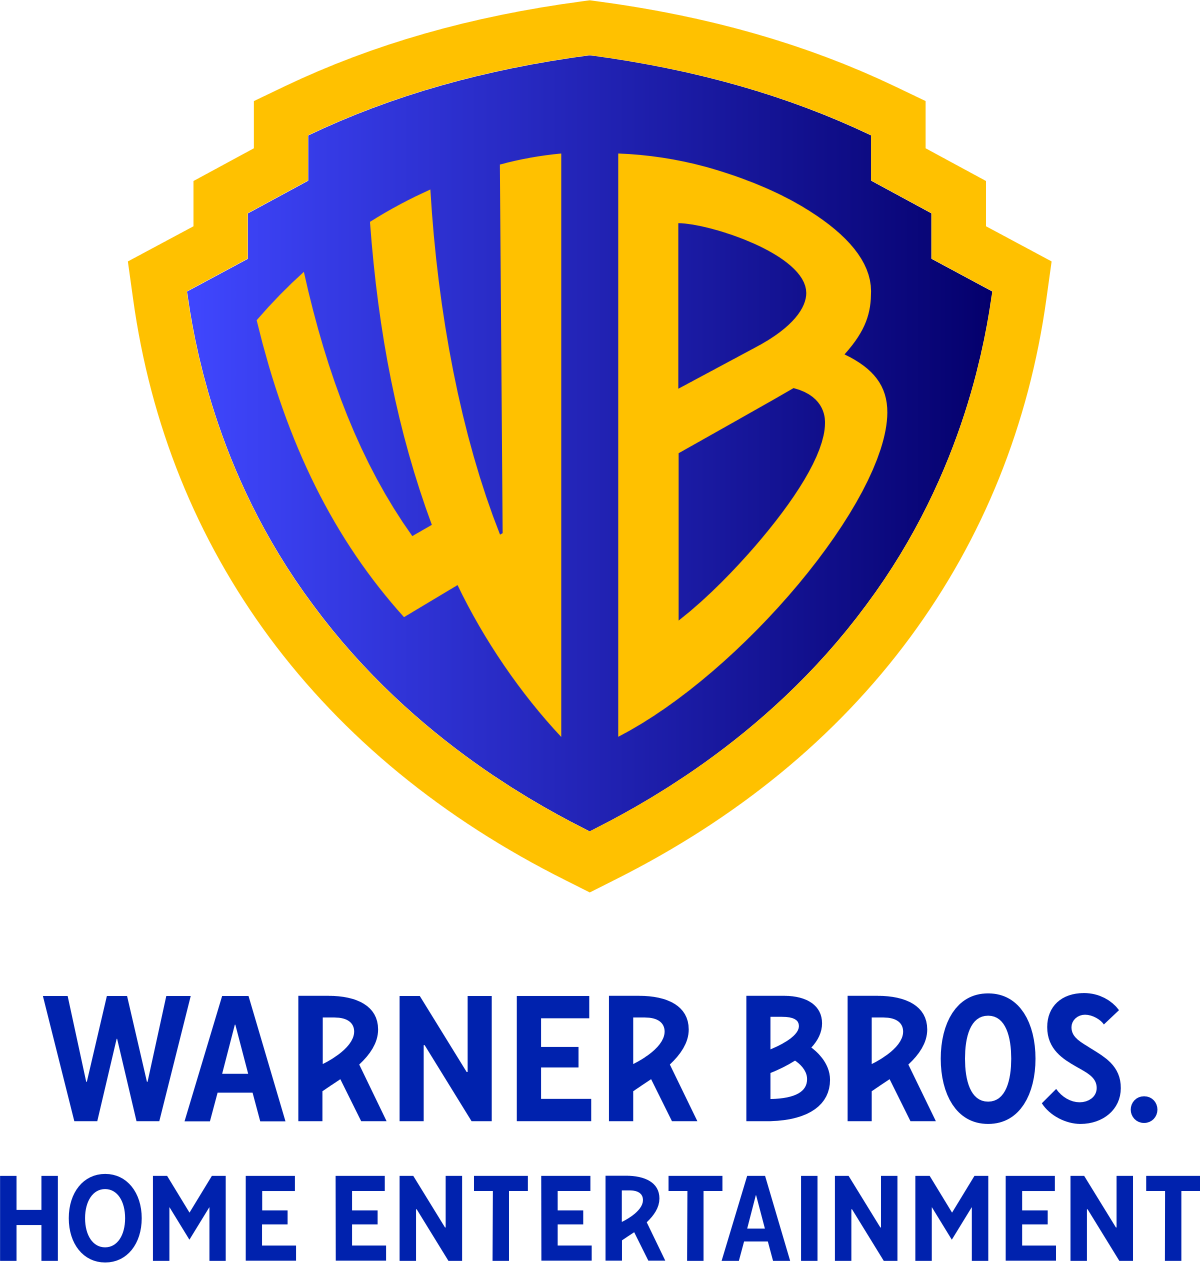 Warner Bros. Discovery Plans to Close New Zealand News Business - Bloomberg